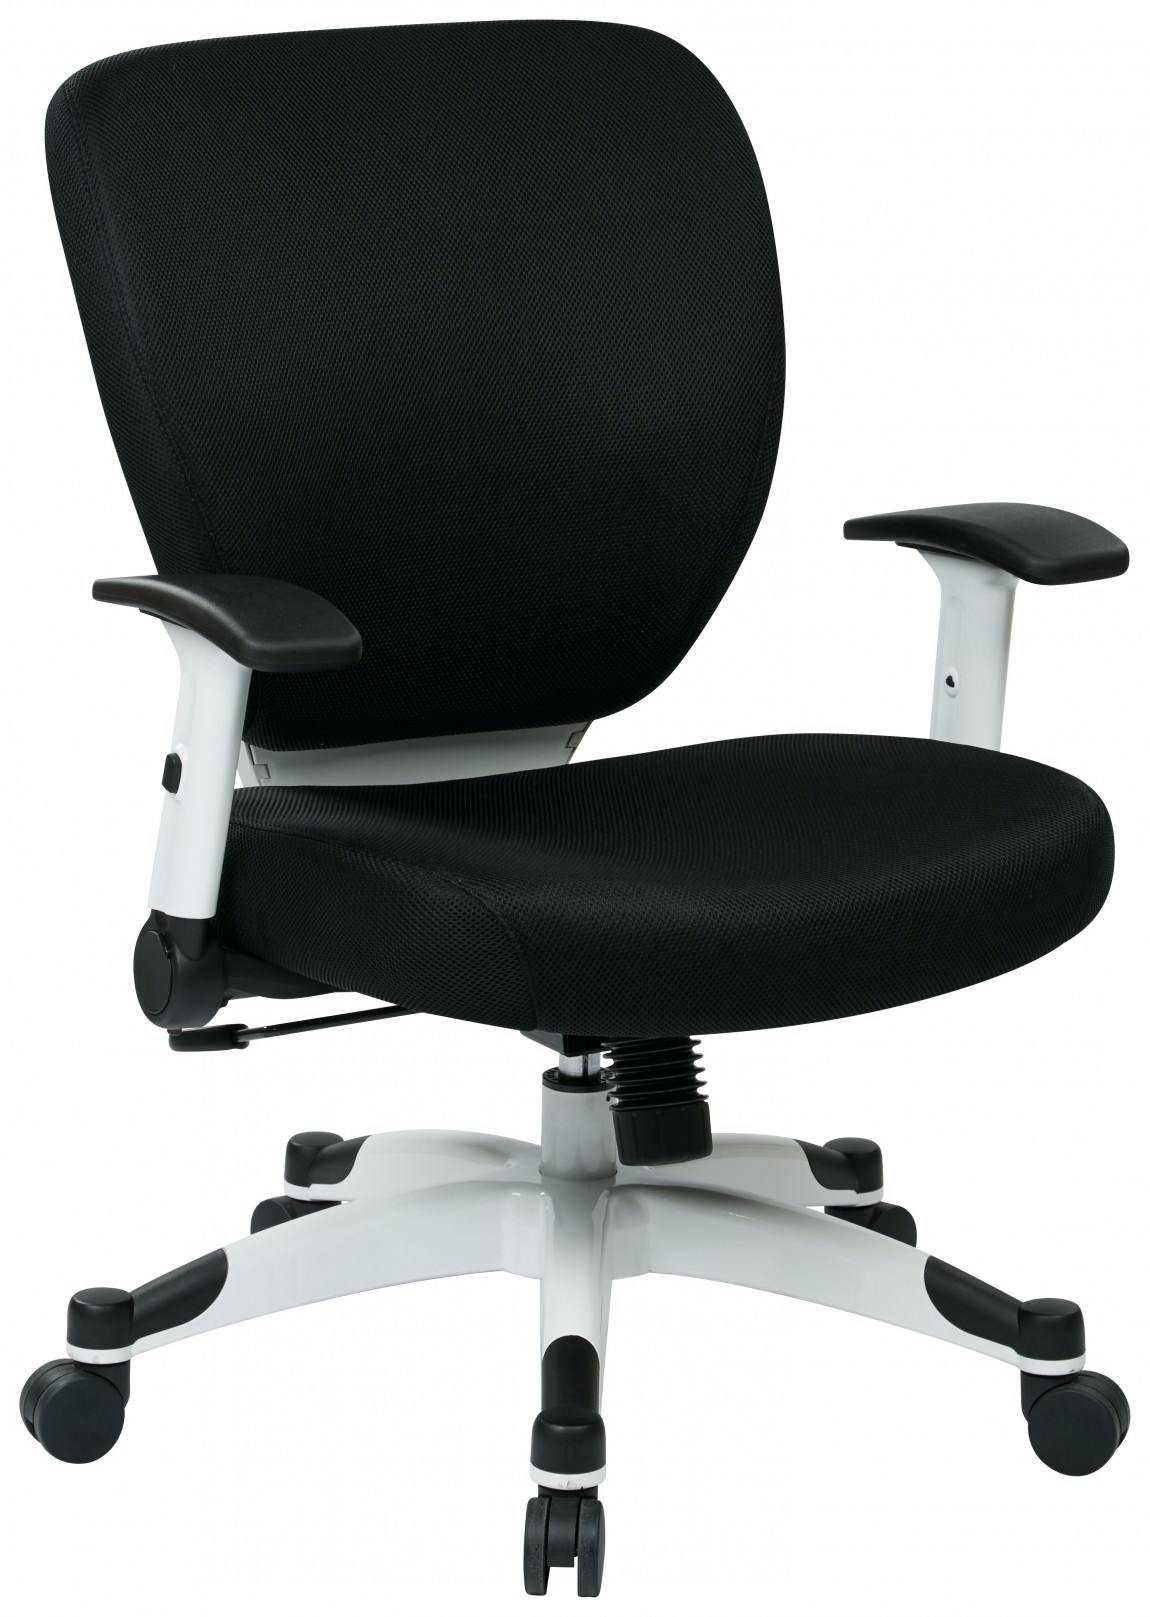 Mid-Back Office Chair